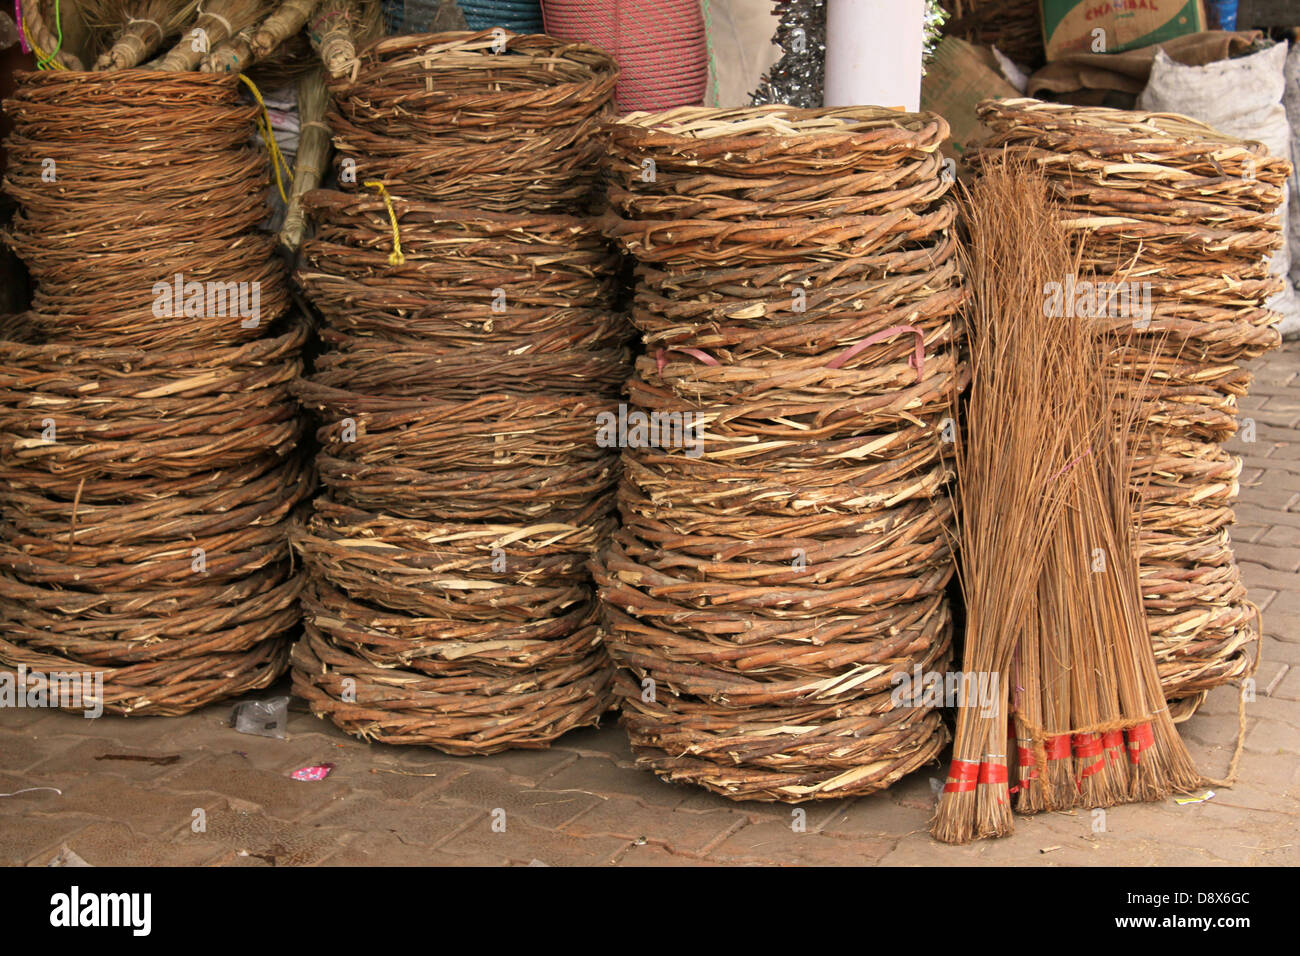 Baskets made of Giant Cane and broom Stock Photo